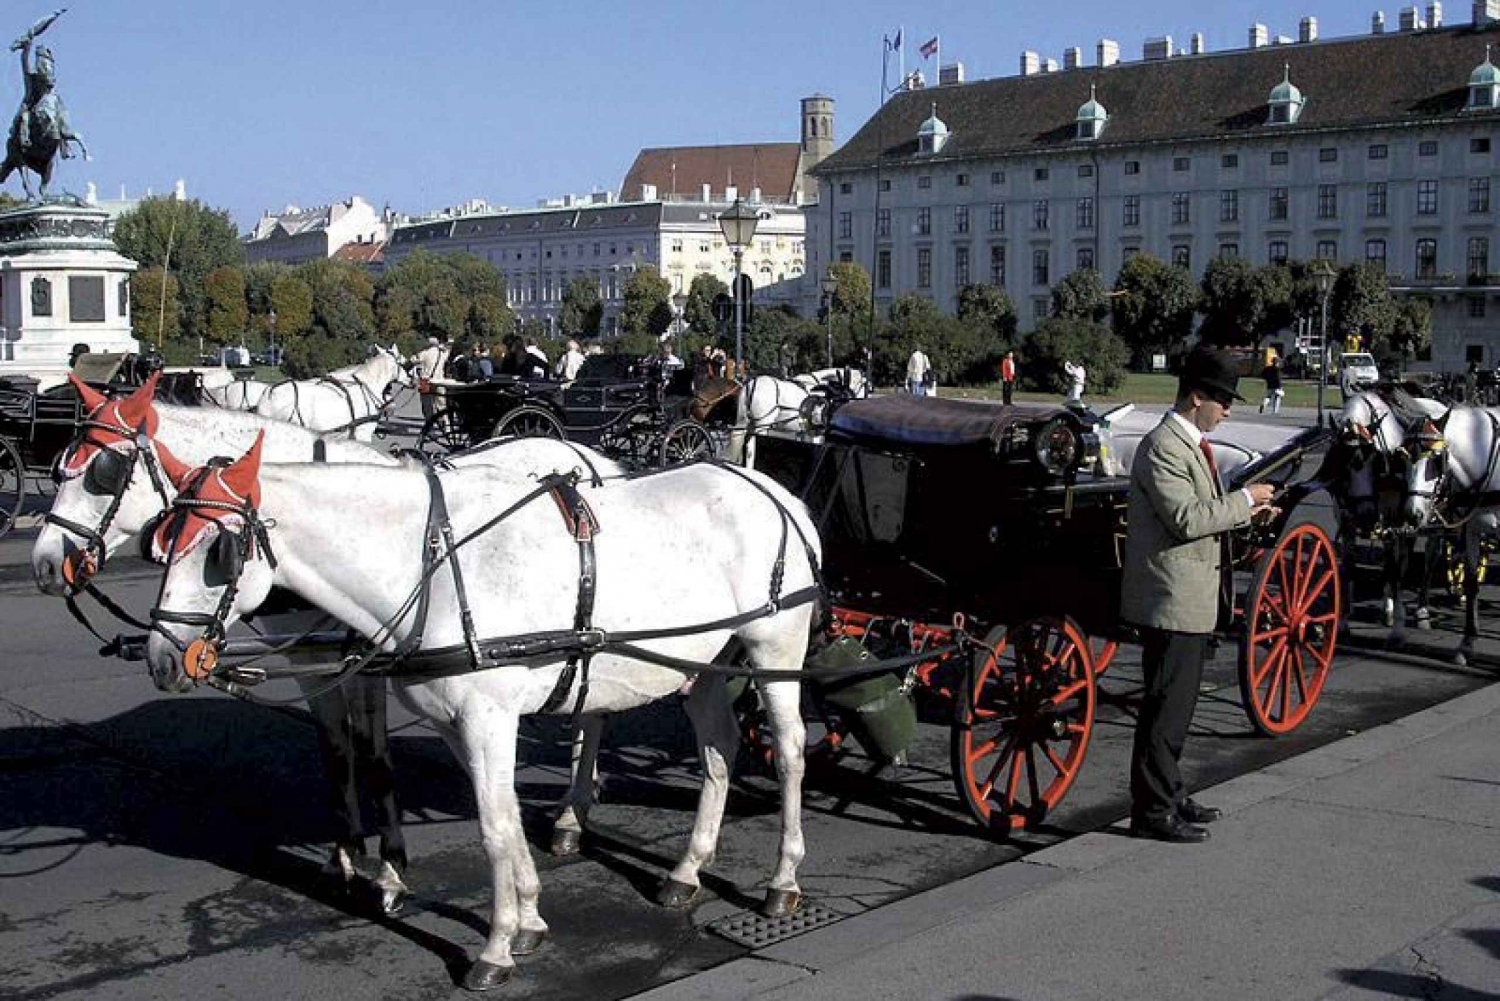 Vienna Mozart Concert with Dinner and Carriage Ride